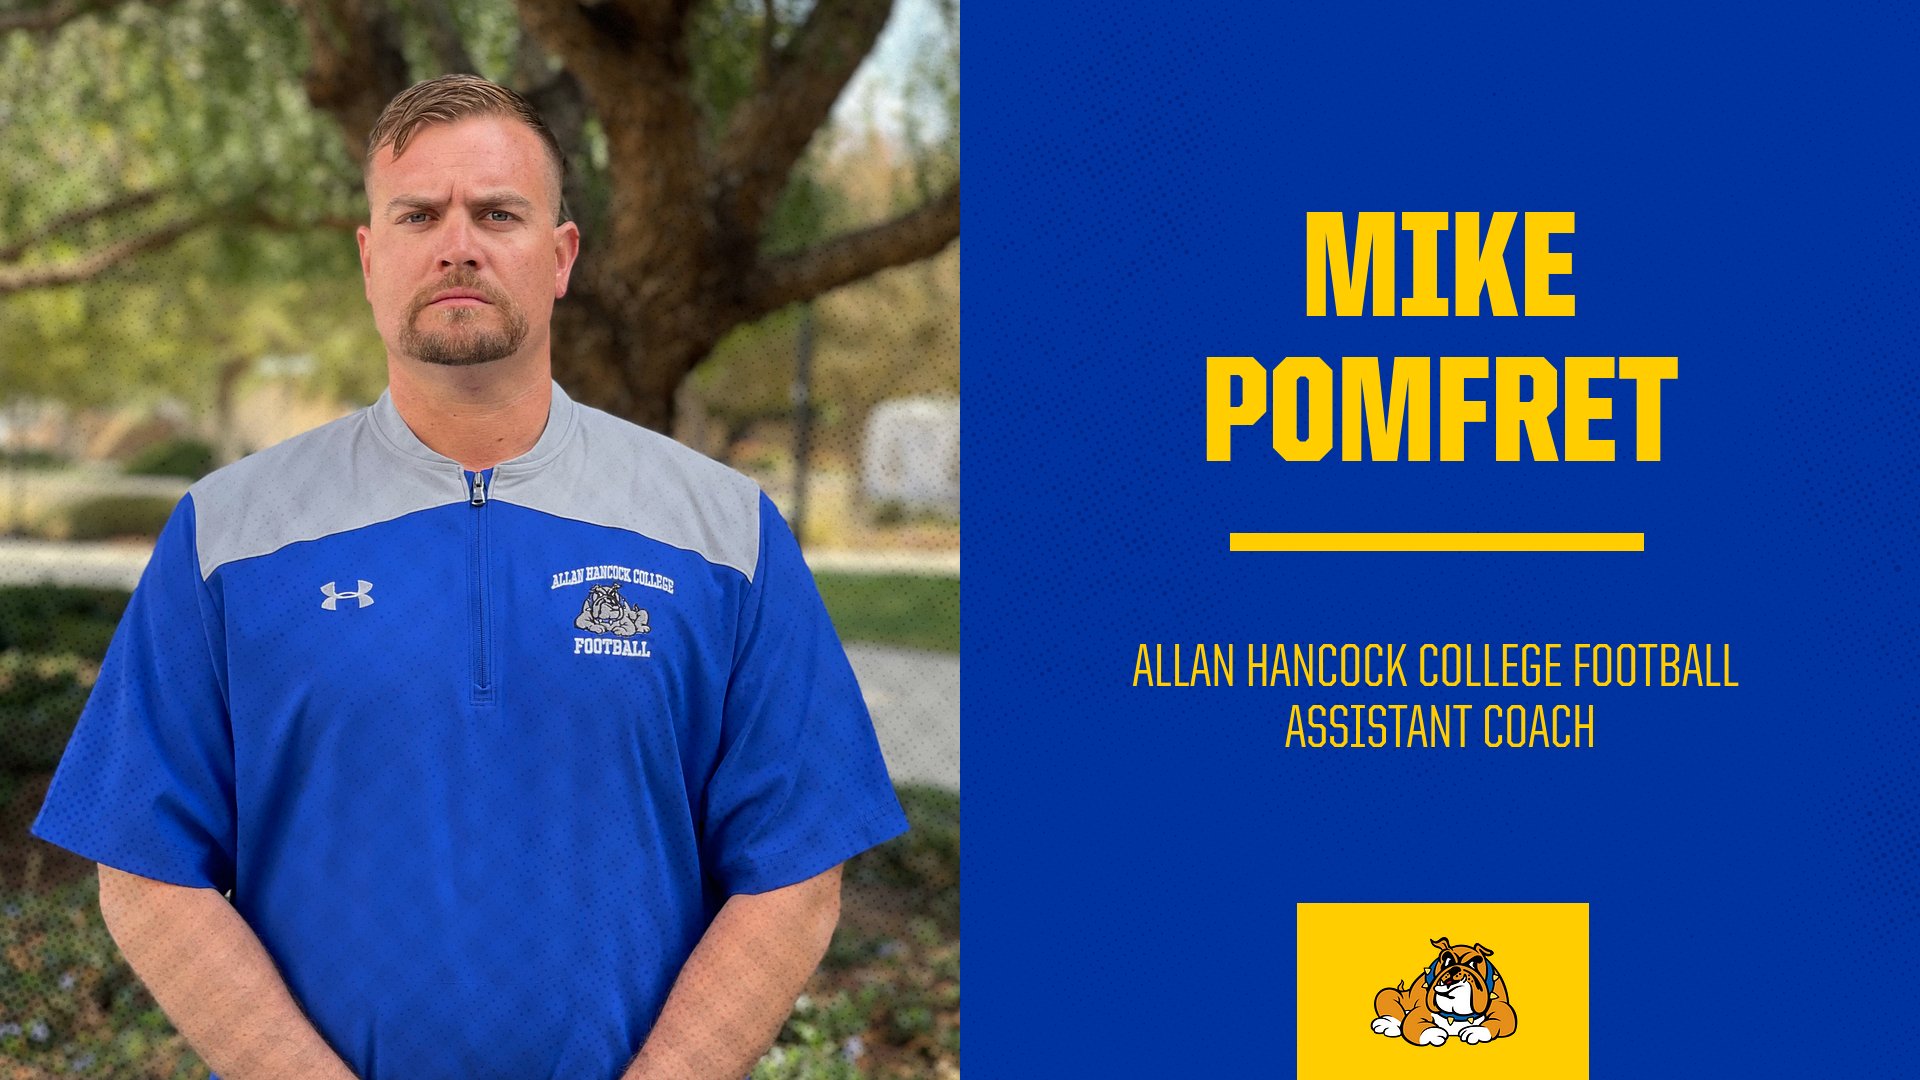 Allan Hancock Football Adds Mike Pomfret to Coaching Staff